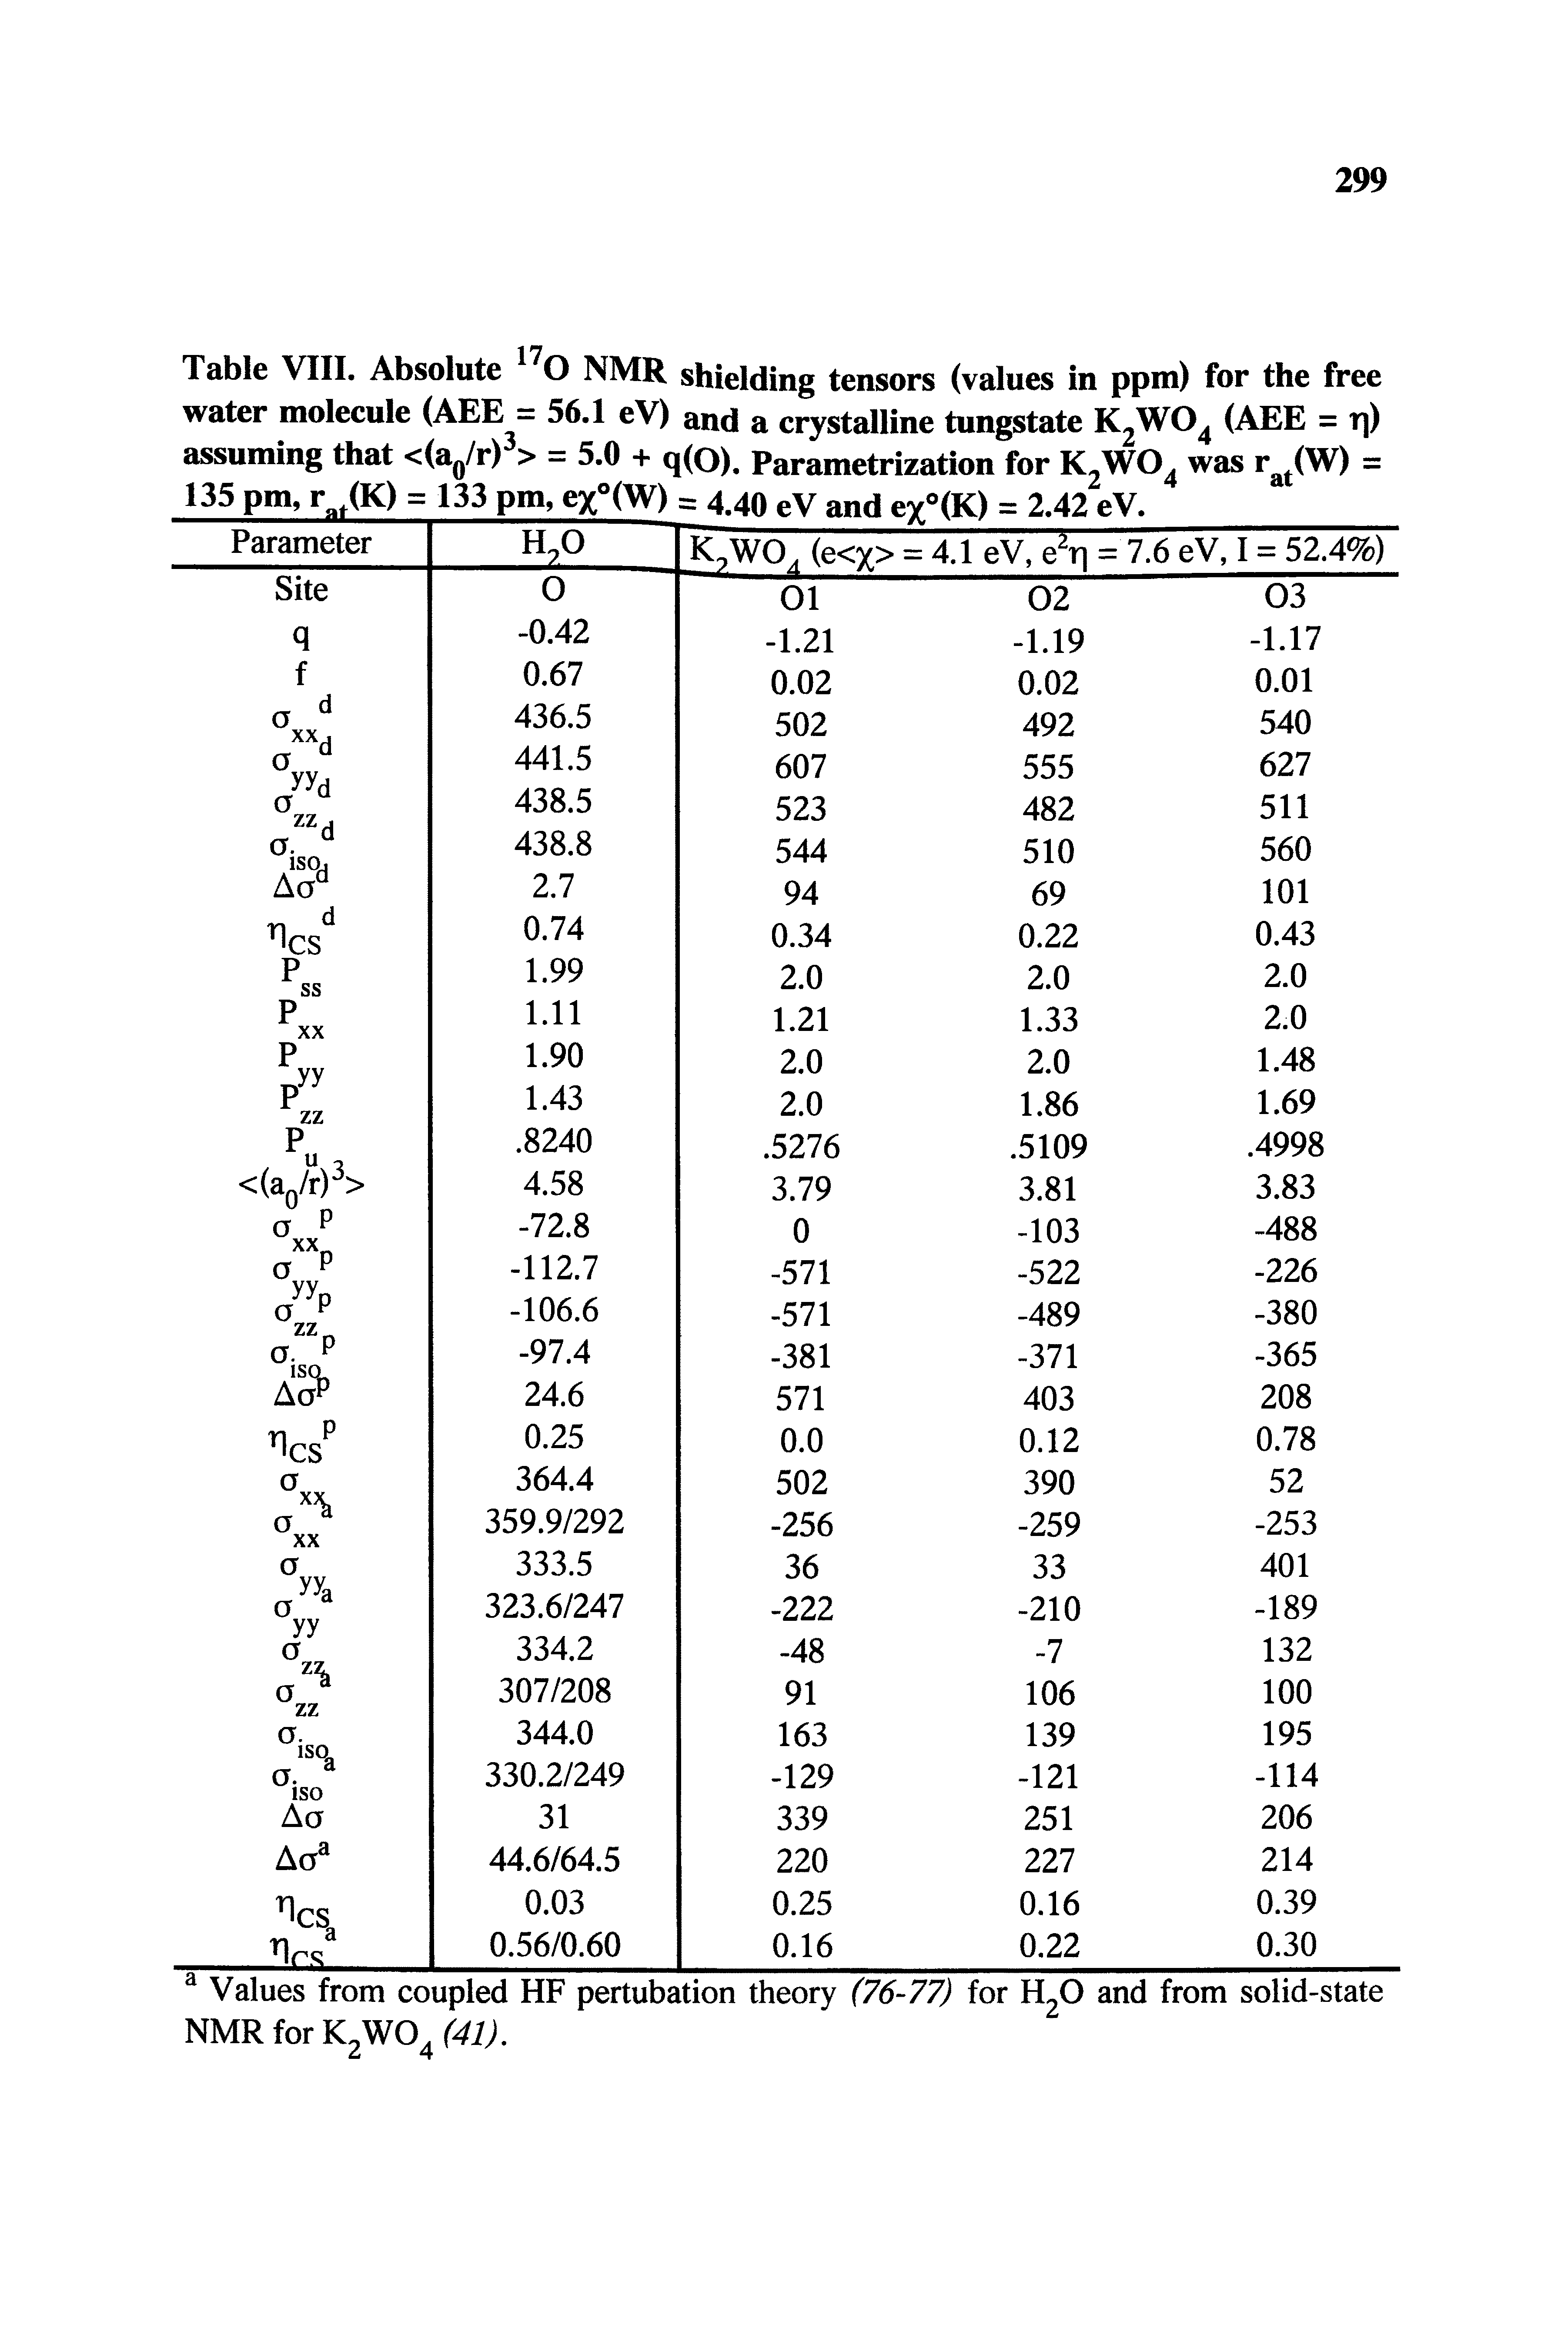 Table VIII. Absolute O NMR shielding tensors (values in ppm) for the free water molecule (AEE = 56.1 eV) and a crystalline tungstate K2W04 (AEE = t ) assuming that <(a0/r)3> = 5.0 + q(O). Parametrization for K1WOd was r t(W) =...